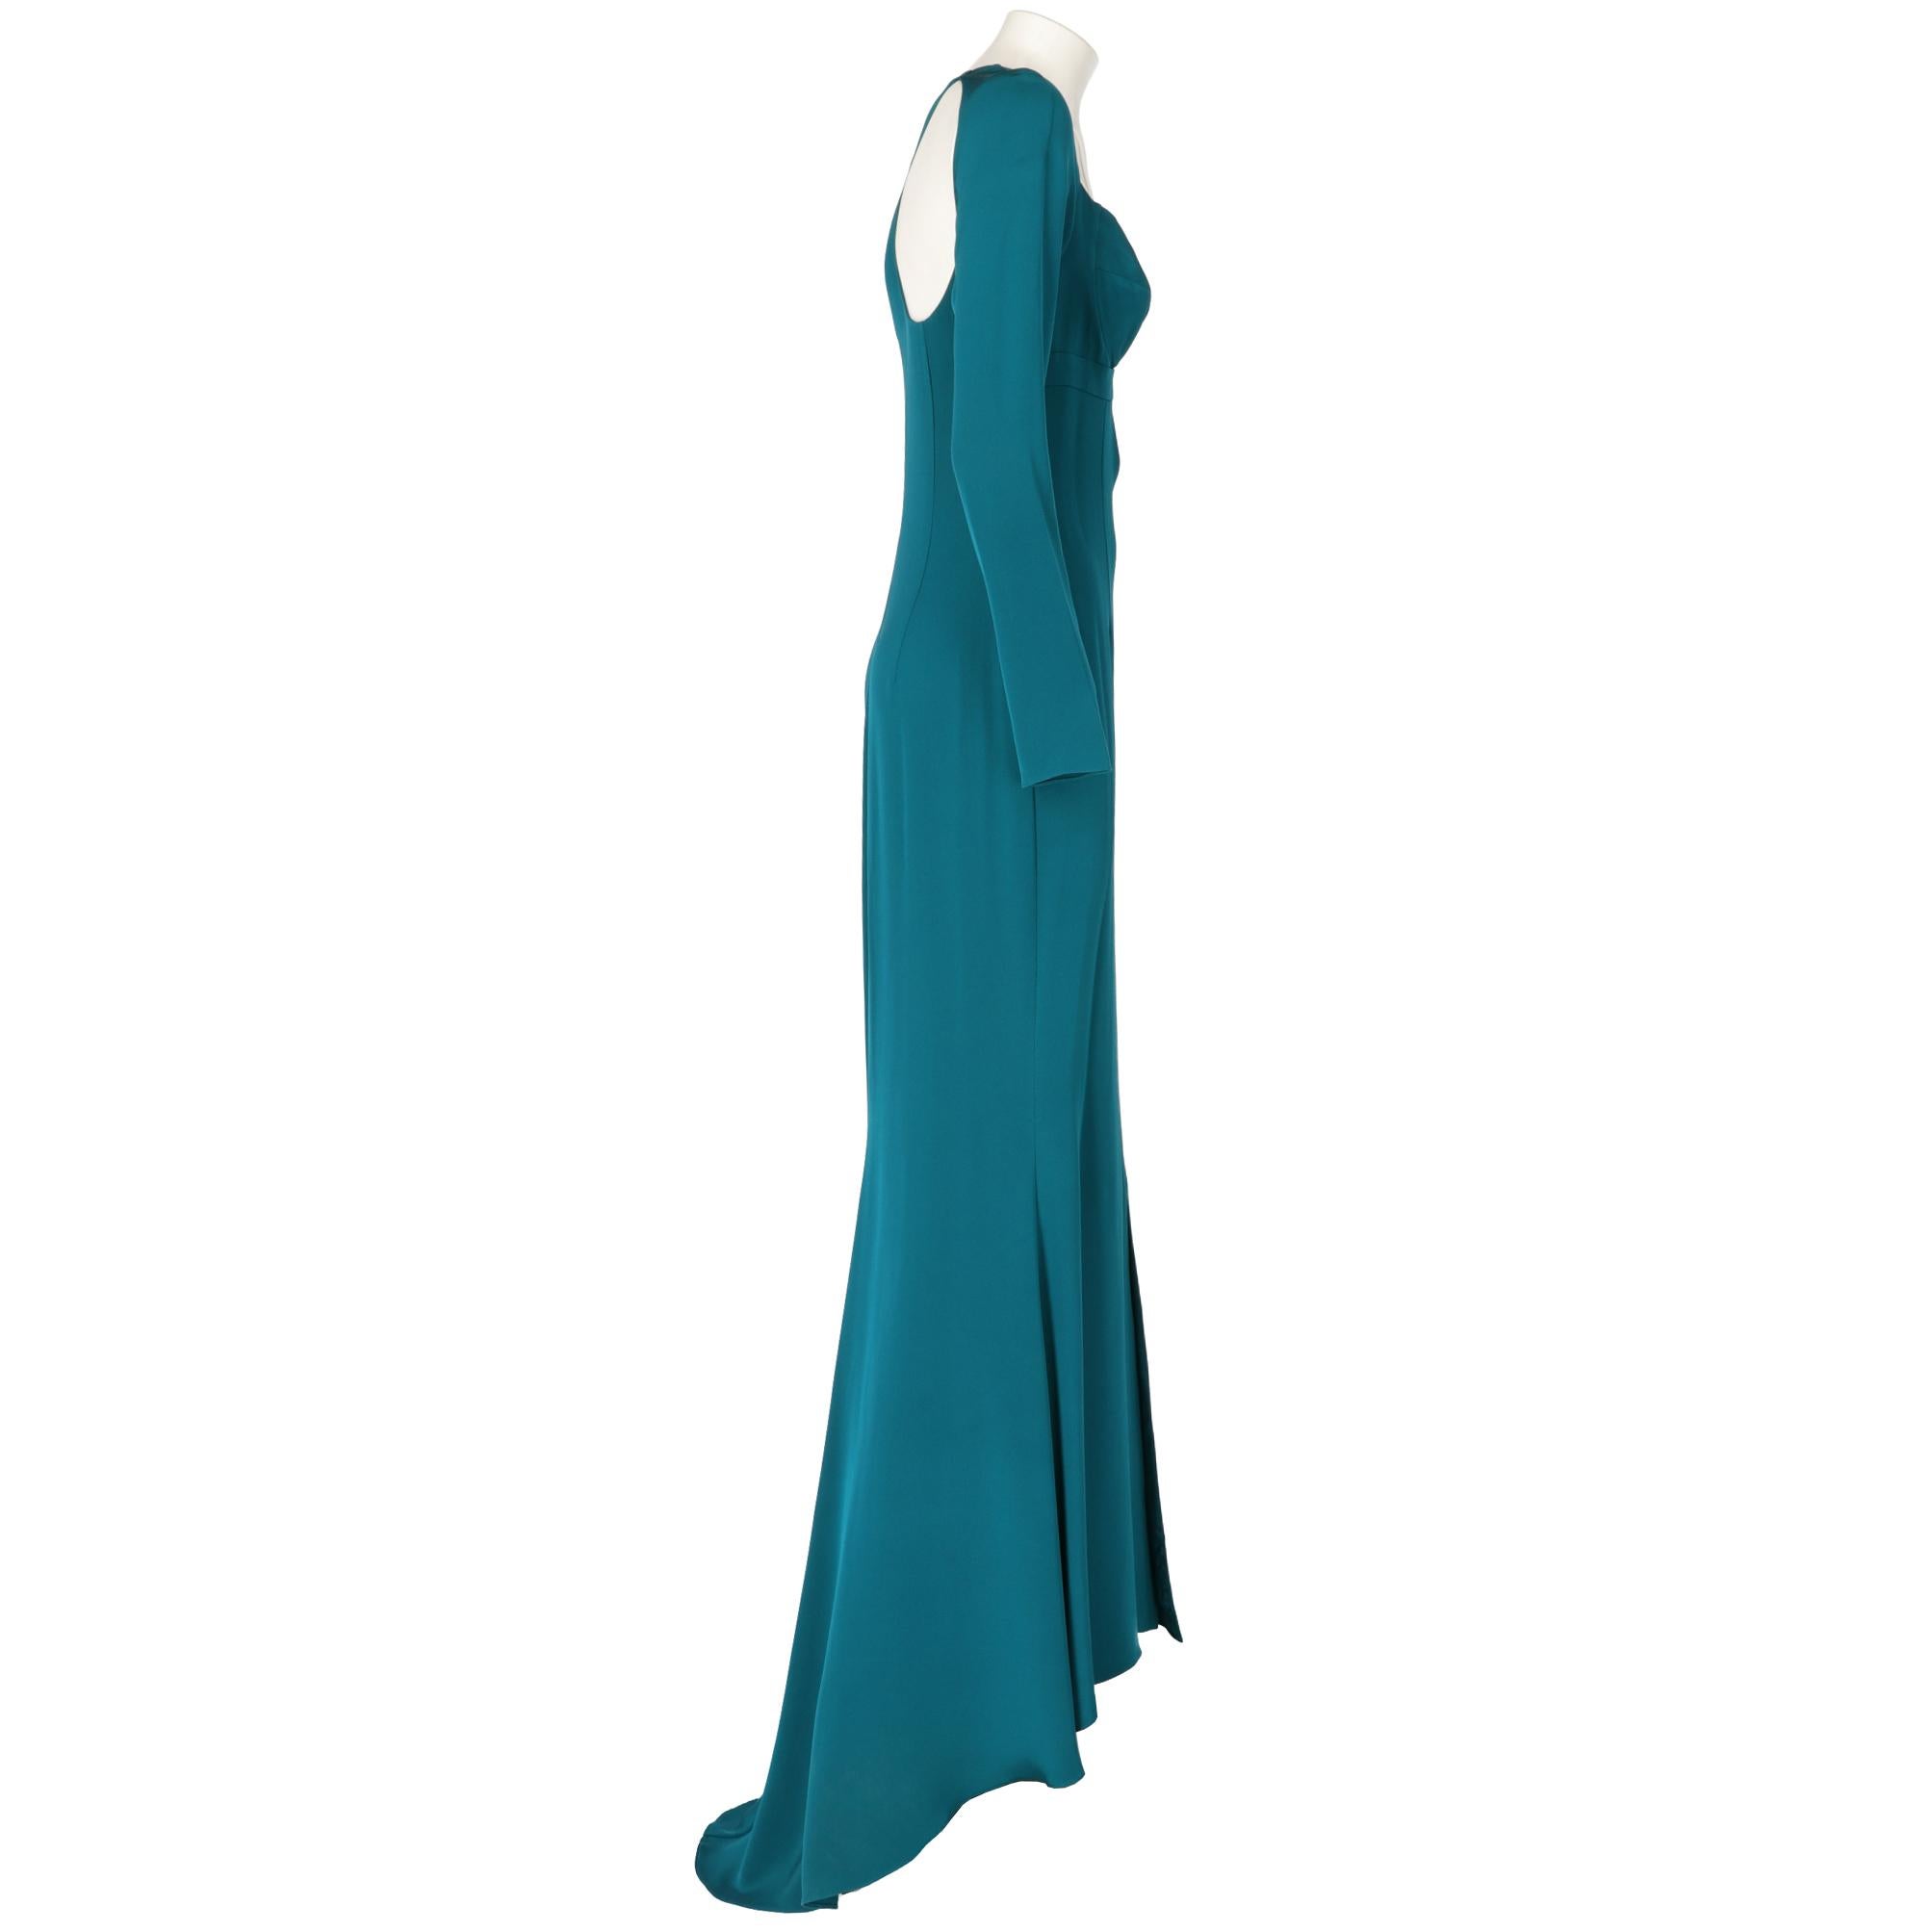 Cushnie et Ochs long train petrol dress, top with breast cups and decorative cut out, long sleeves, zip and hook closure on the back and decorative cut out on the back, large front slit and train on the back. Lined interior.

Years: 2000s

Made in